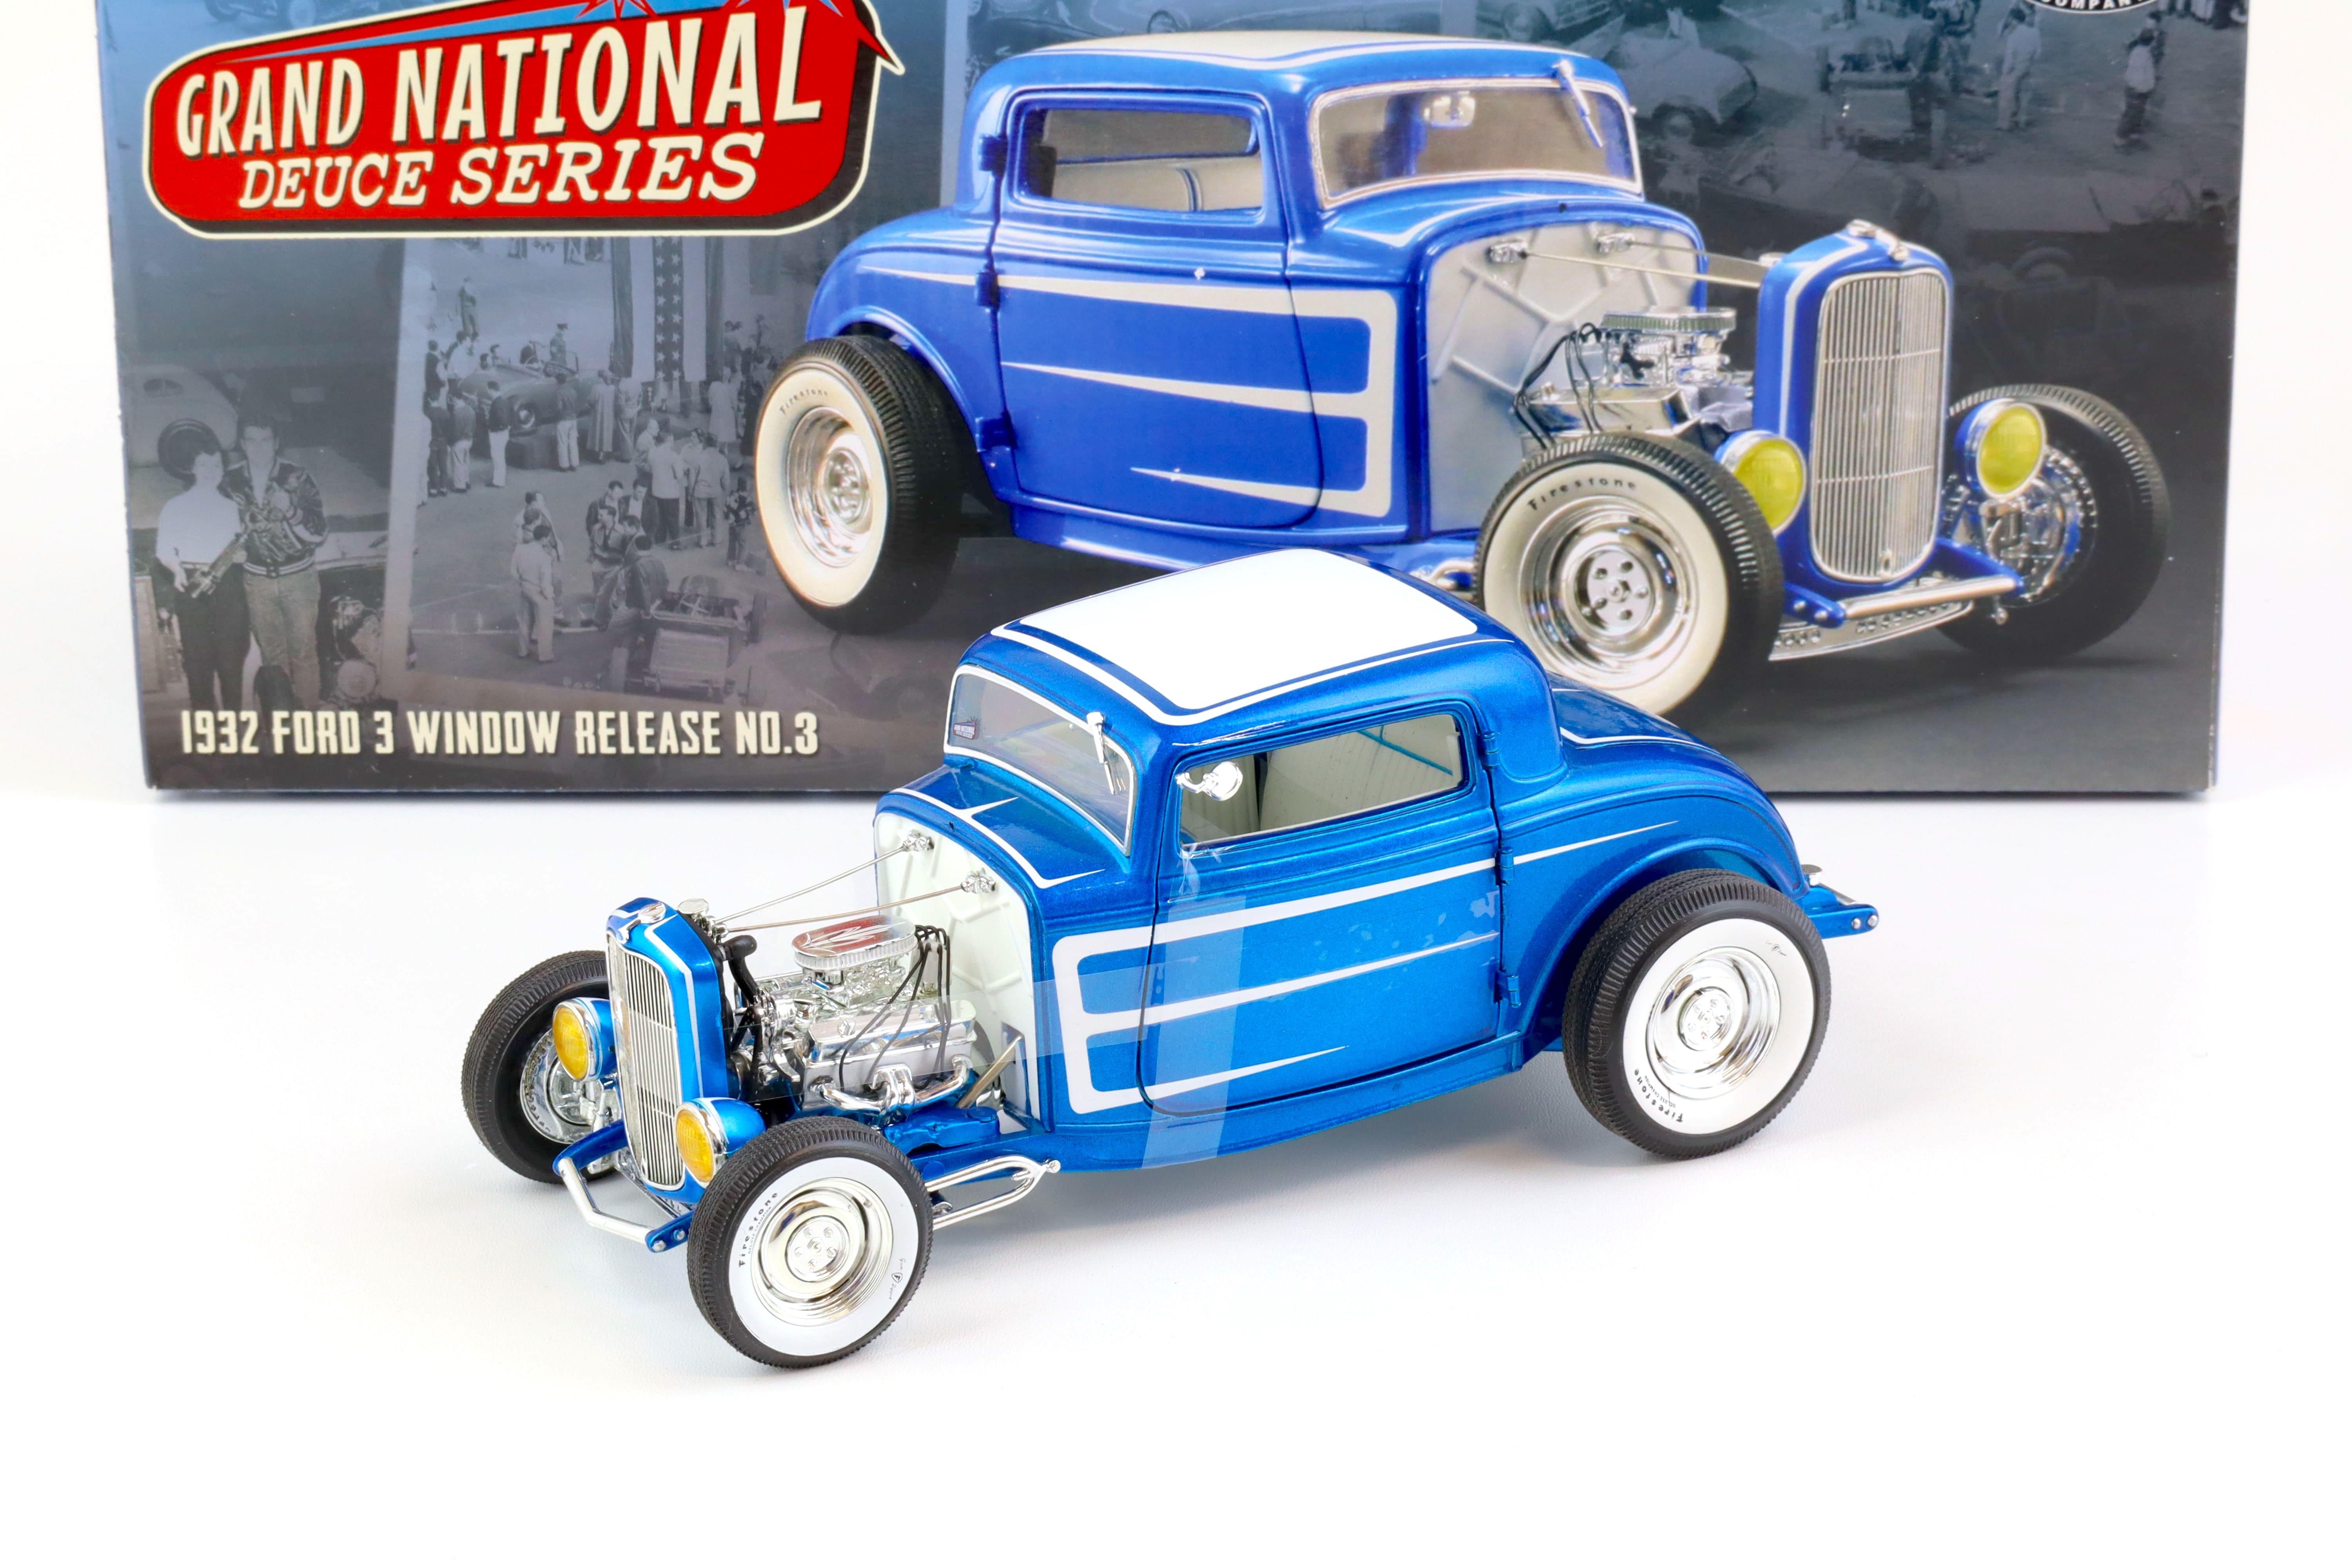 1:18 ACME 1932 Ford 3 Window Hot Rod Grand National Deuce Series No.3 blue/ white